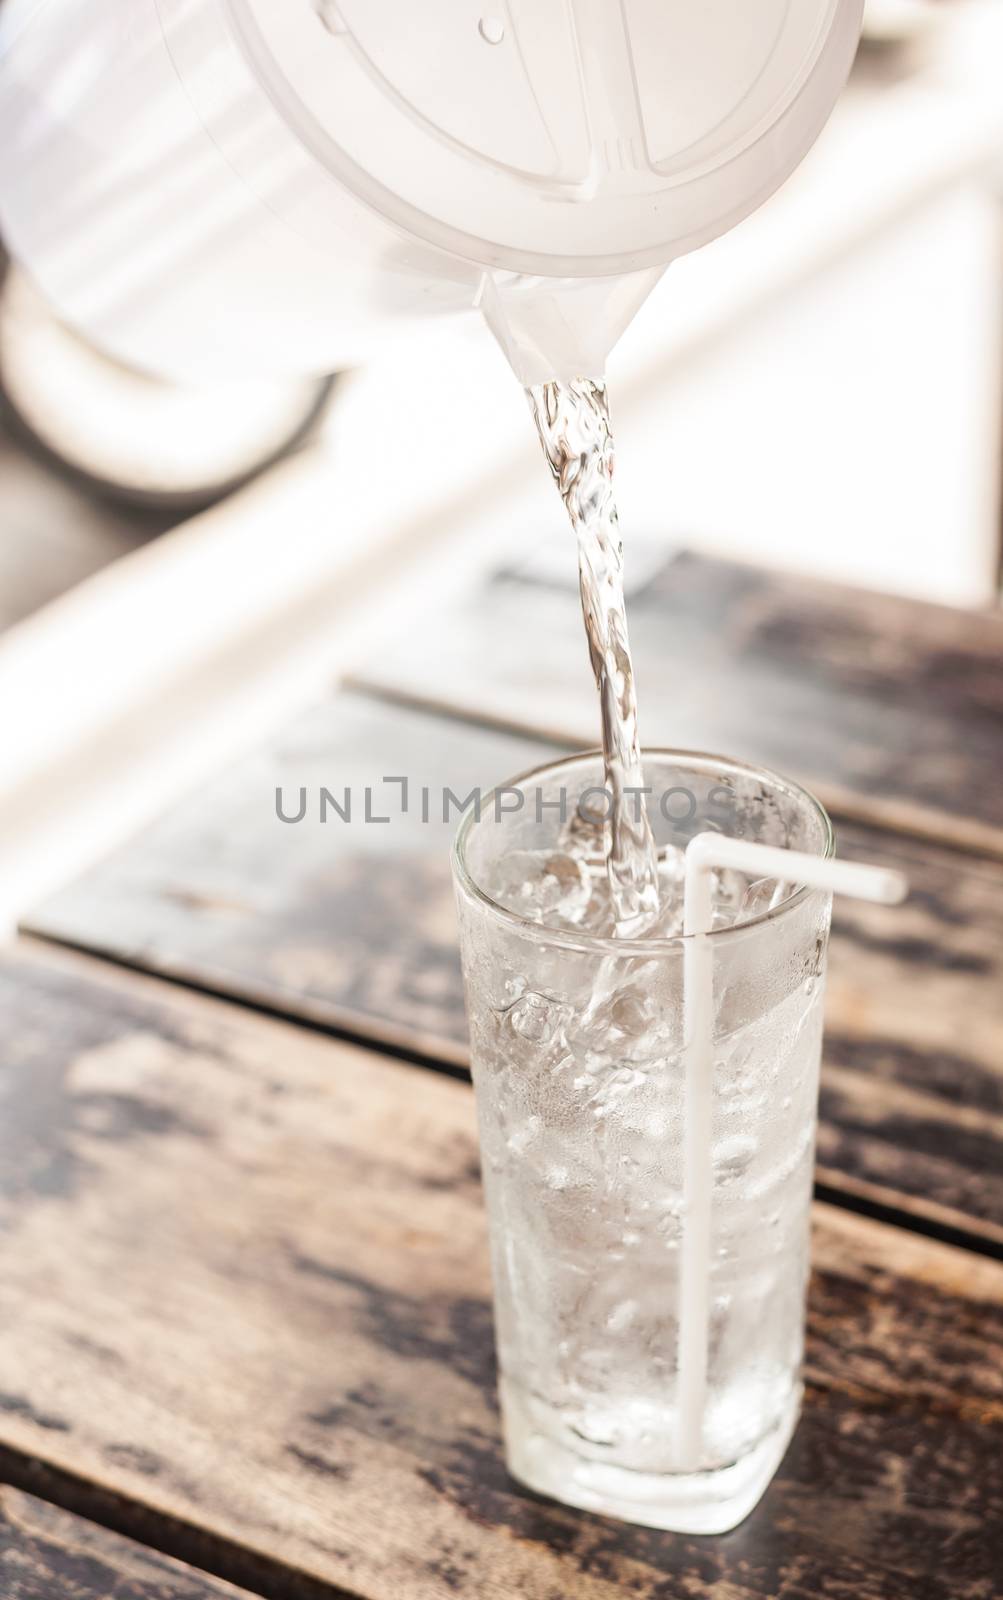 Water Splashing From Glass, Ice Water For Drink